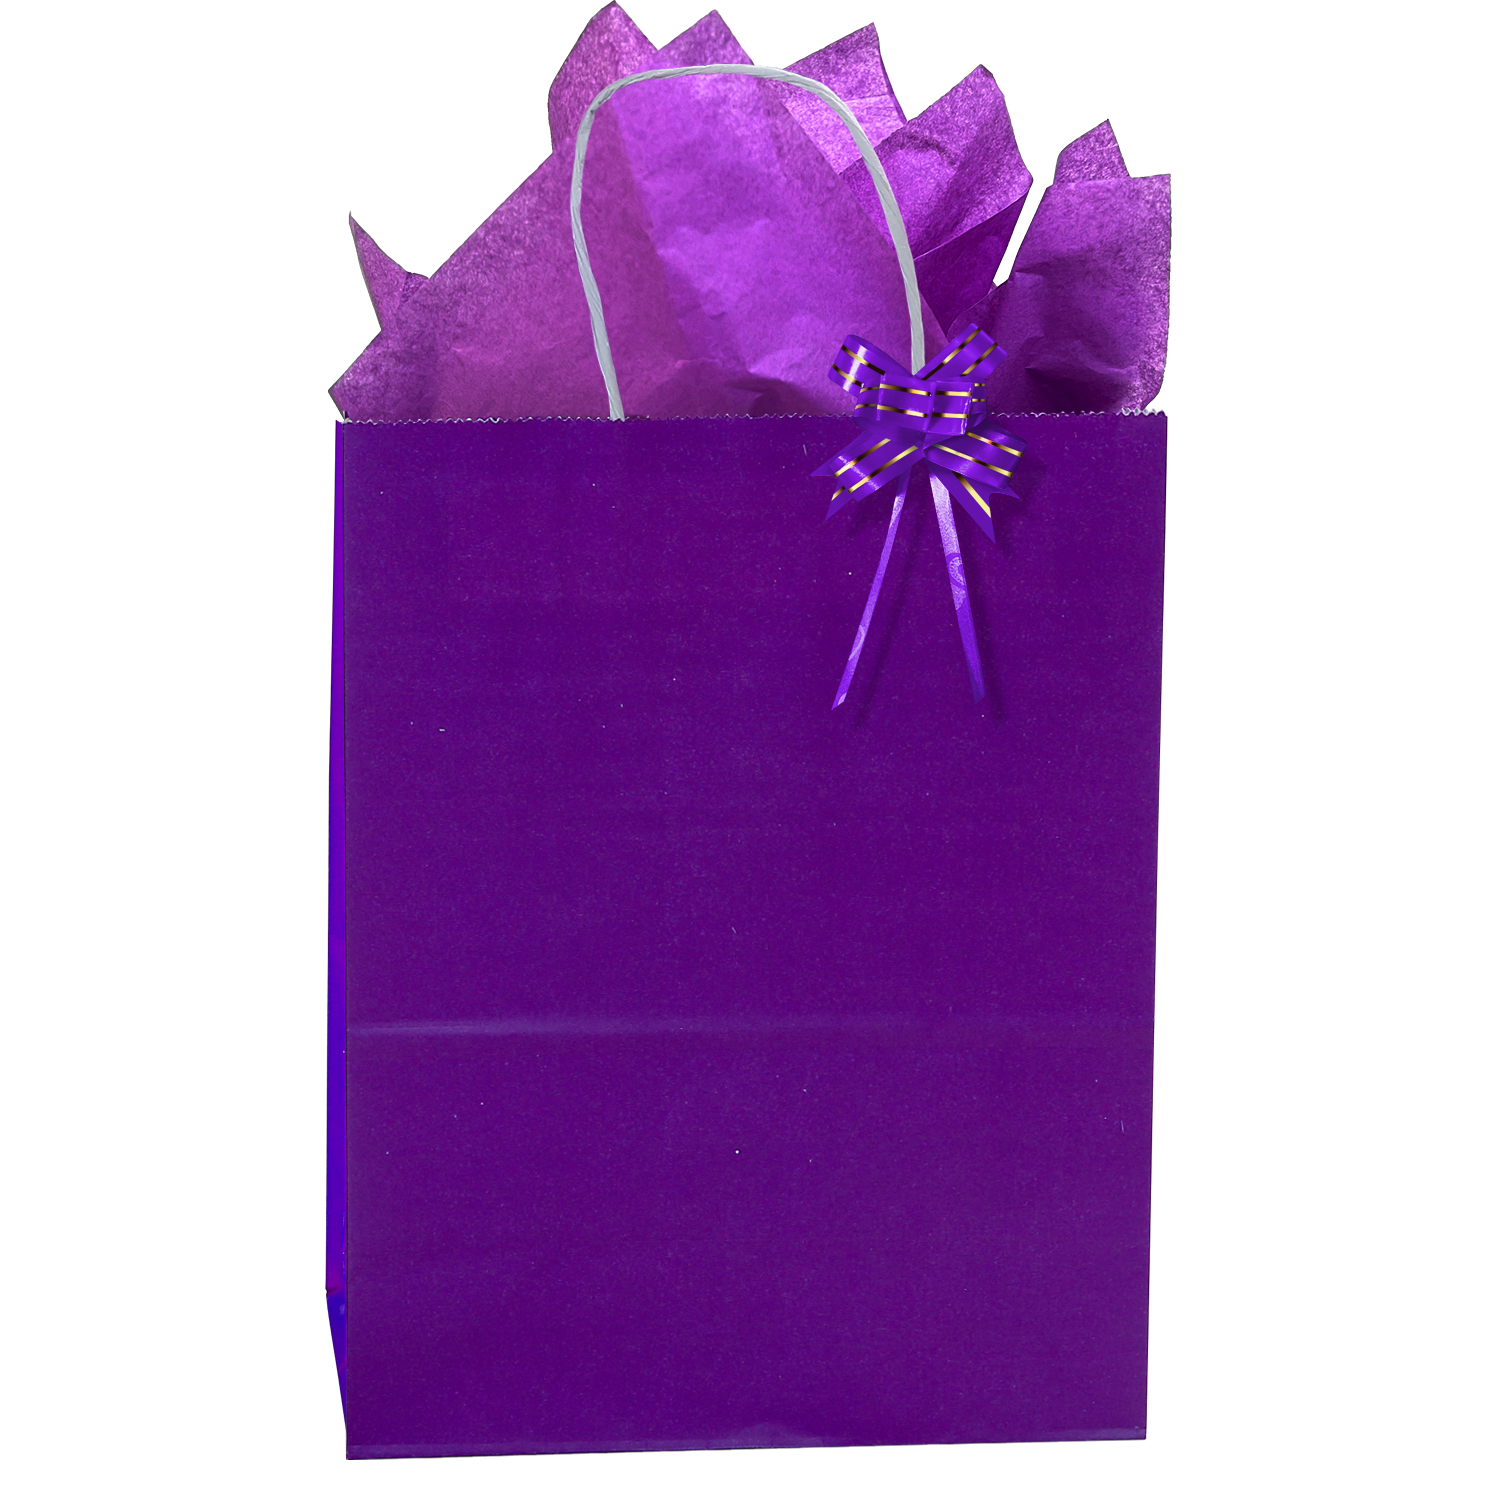  Kolaxen Purple Kraft Paper Gift Bags with Tissue Paper 24 Pcs  10.6 * 7.9 * 4.3 inches, Medium Gift Bags with Handles for Birthday, Party,  Wedding, Baby Shower… : Health & Household